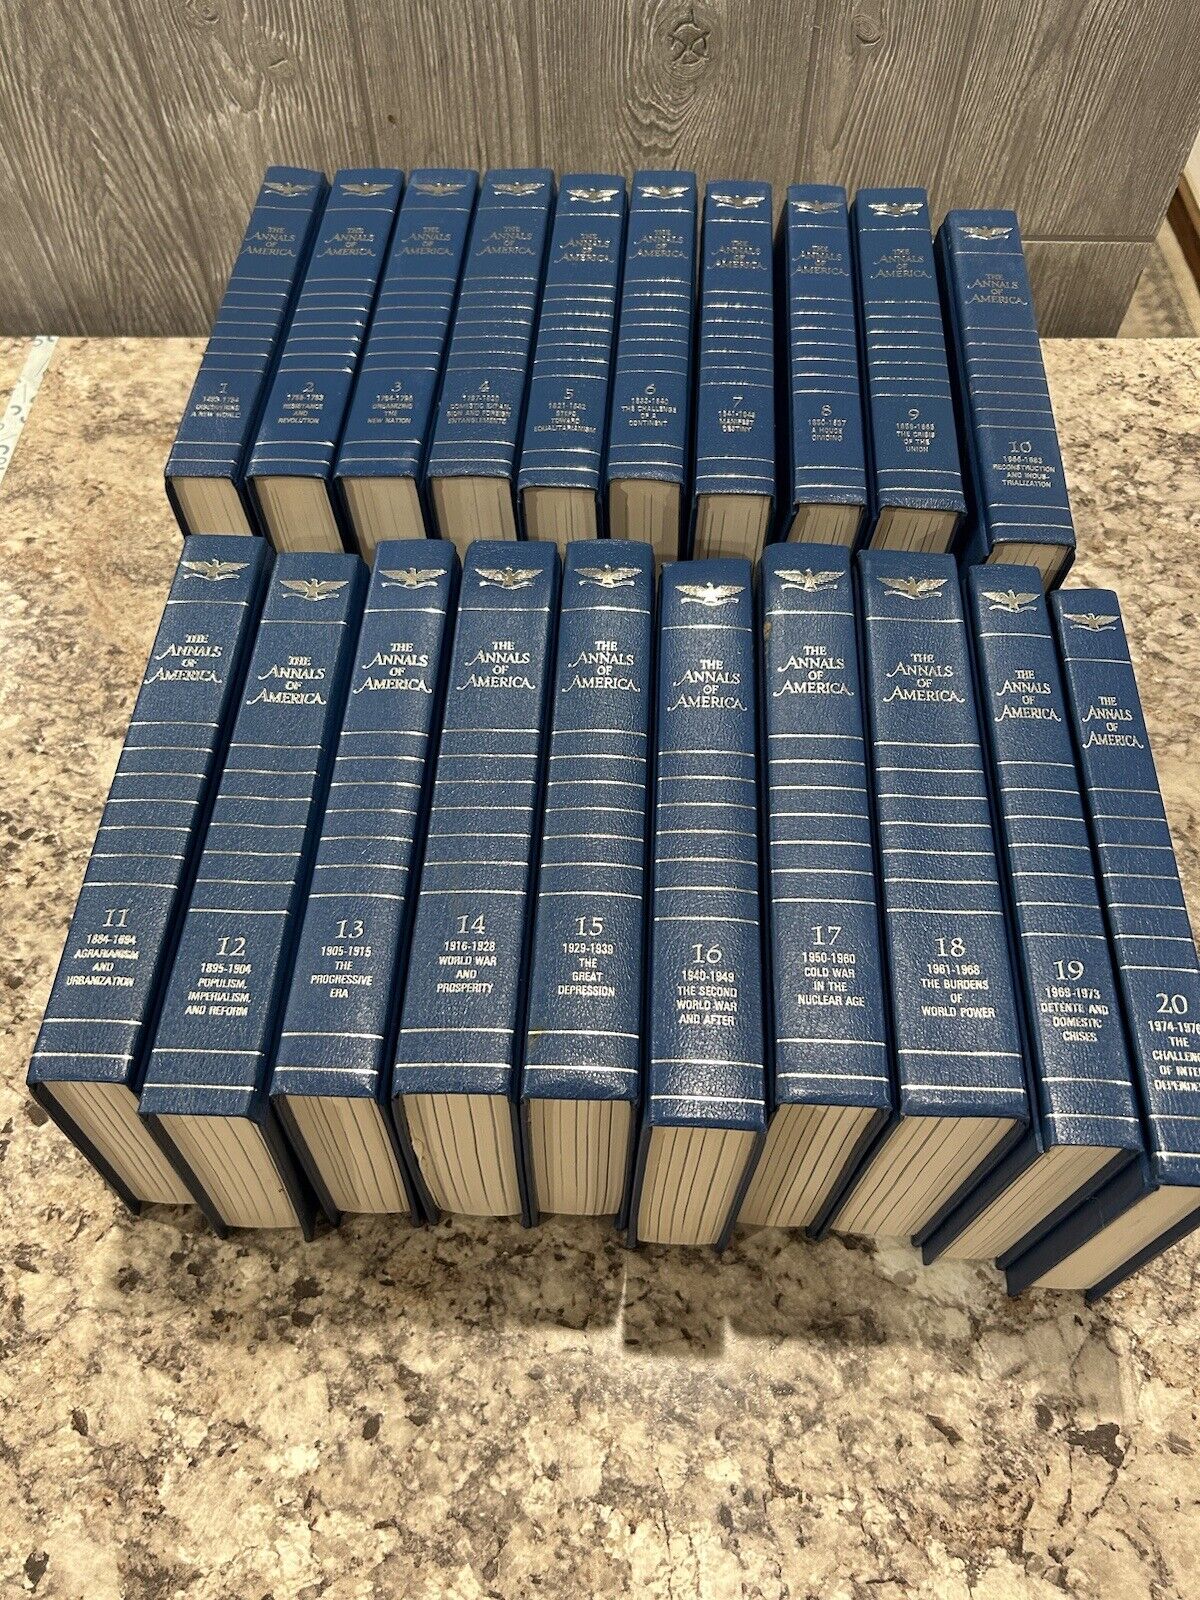 The Annals of America, COMPLETE SET Volumes 1 - 20, c.1977, VGC, ship media mail